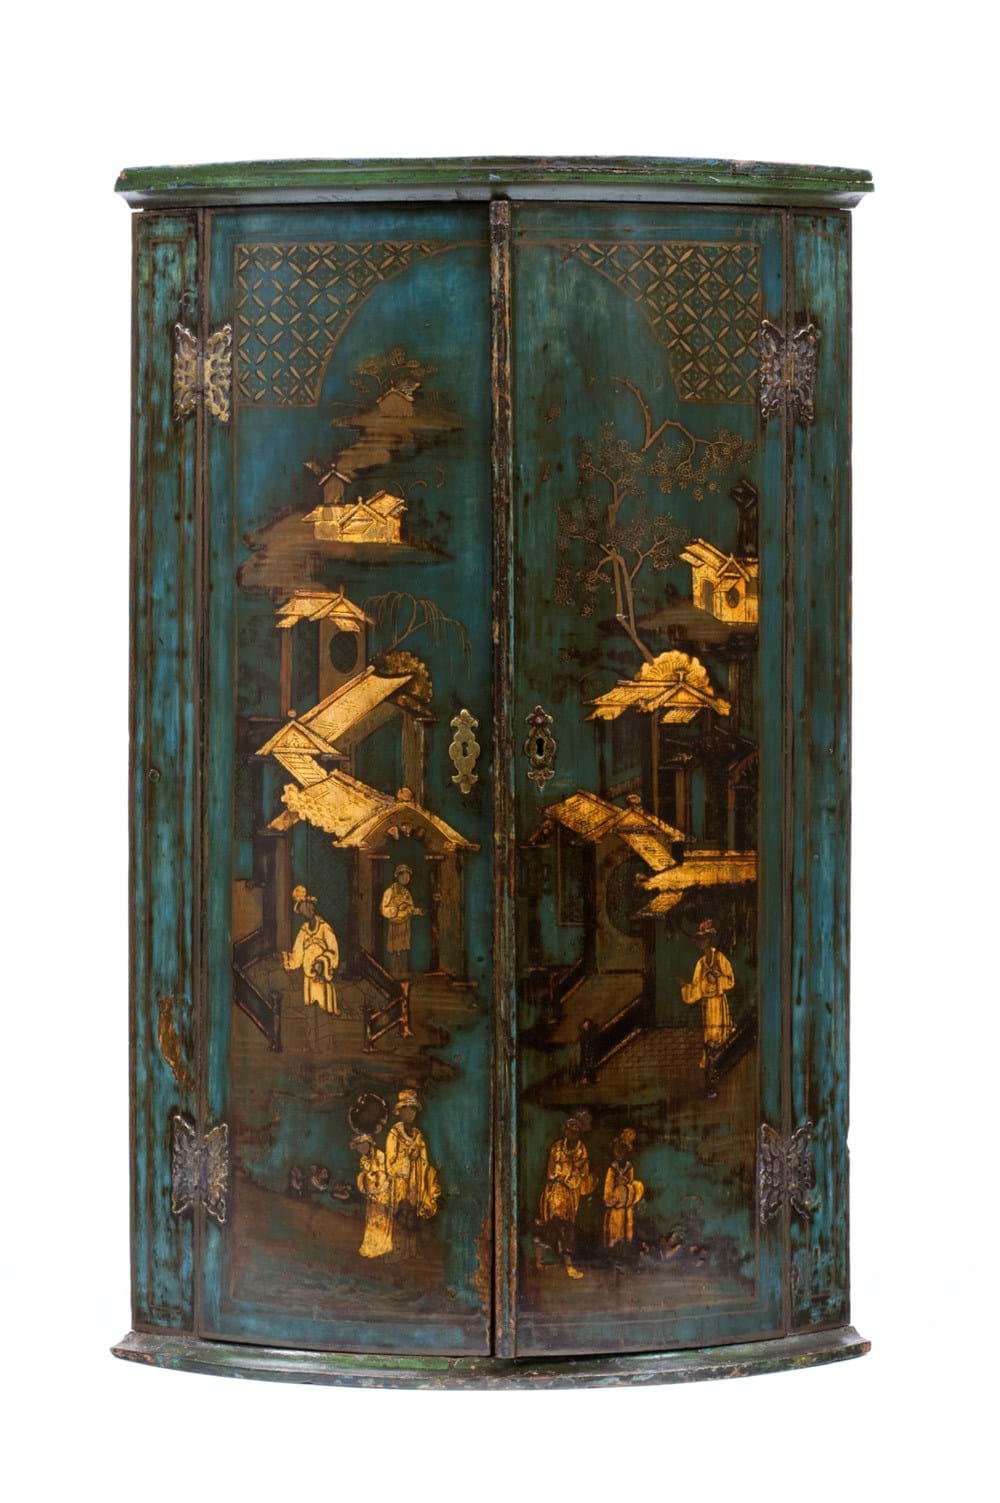 Wooden cabinet painted blue with yellow decoration